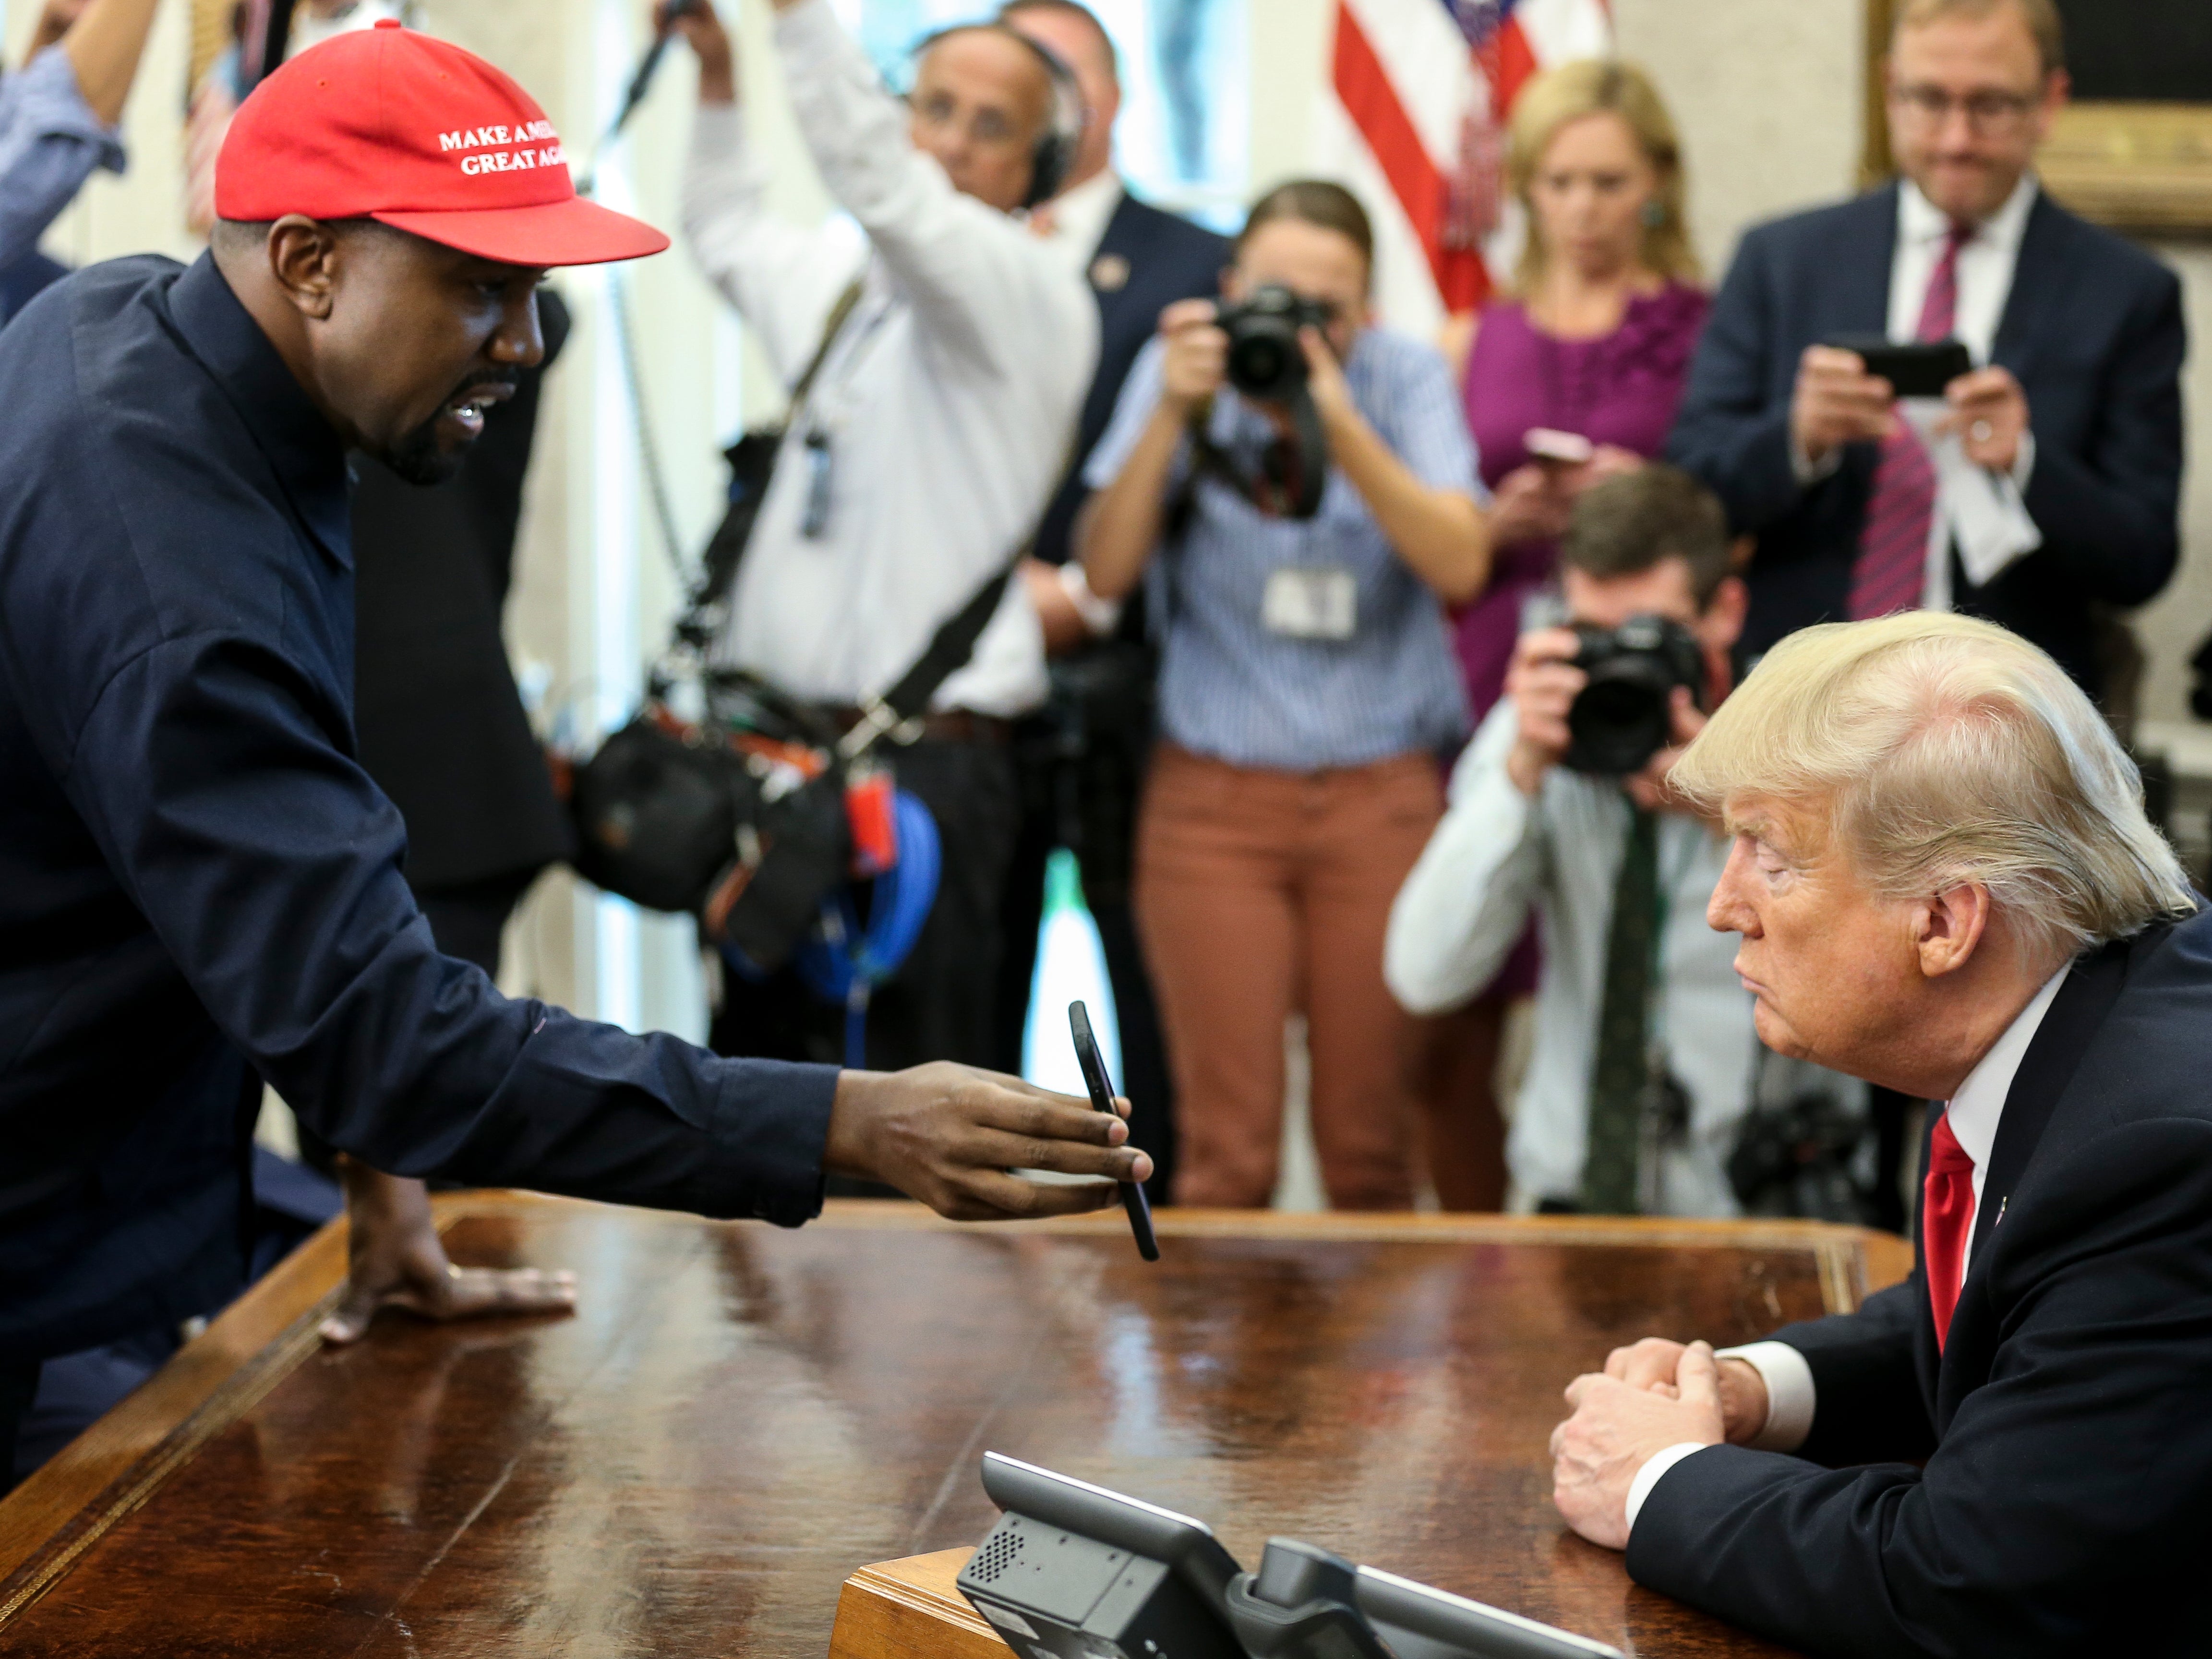 Kanye West shows a picture on a phone to Donald Trump during a meeting in the Oval Office, 11 October, 2018